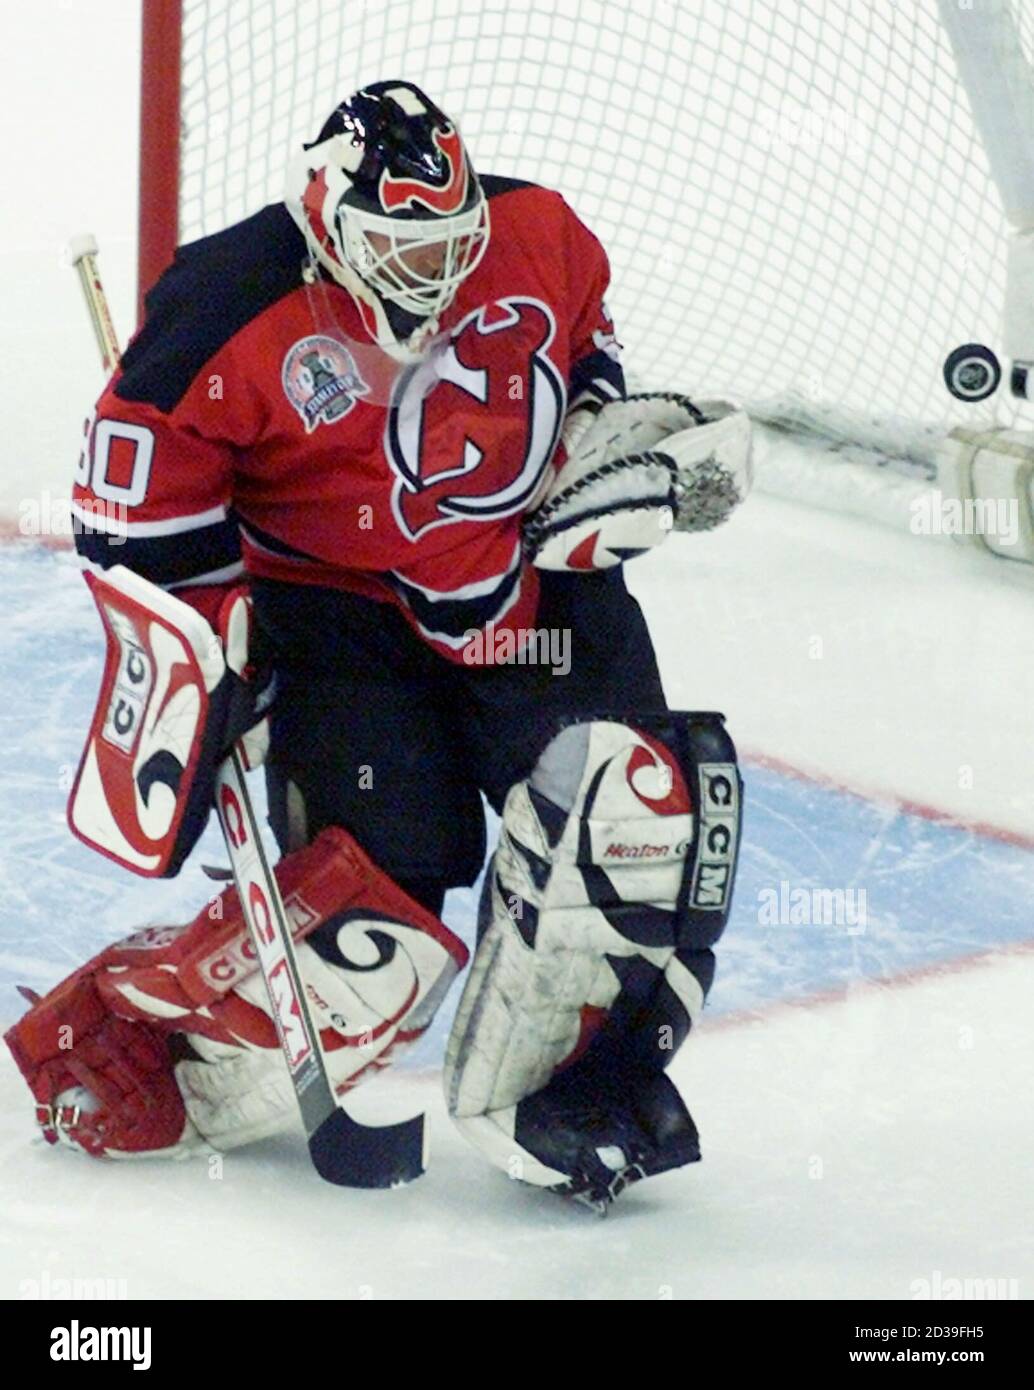 New Jersey Devils goalie Martin Brodeur saves a shot on goal in the first  period of Game 2 of the Stanley Cup Finals May 26, 2001 against the  Colorado Avalanche in Denver.